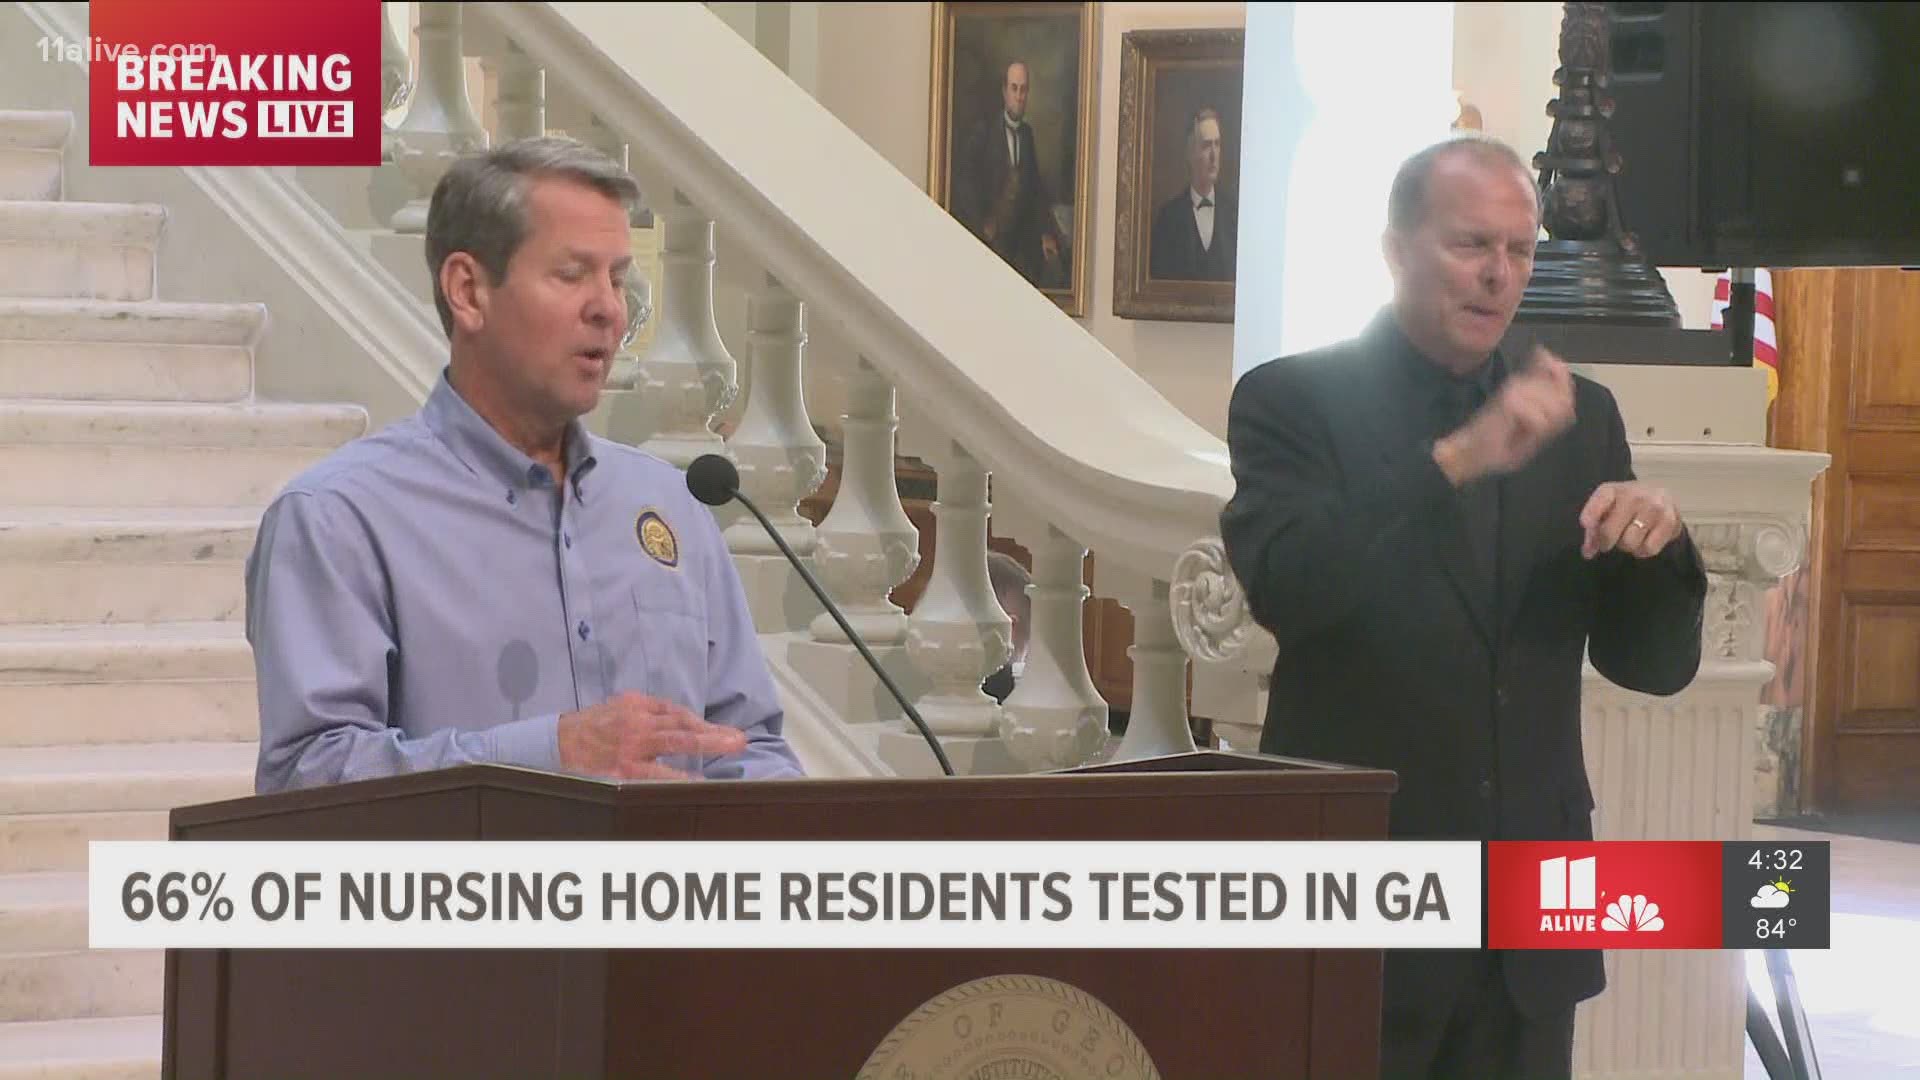 Gov. Kemp talked about sports during his news conference Thursday.